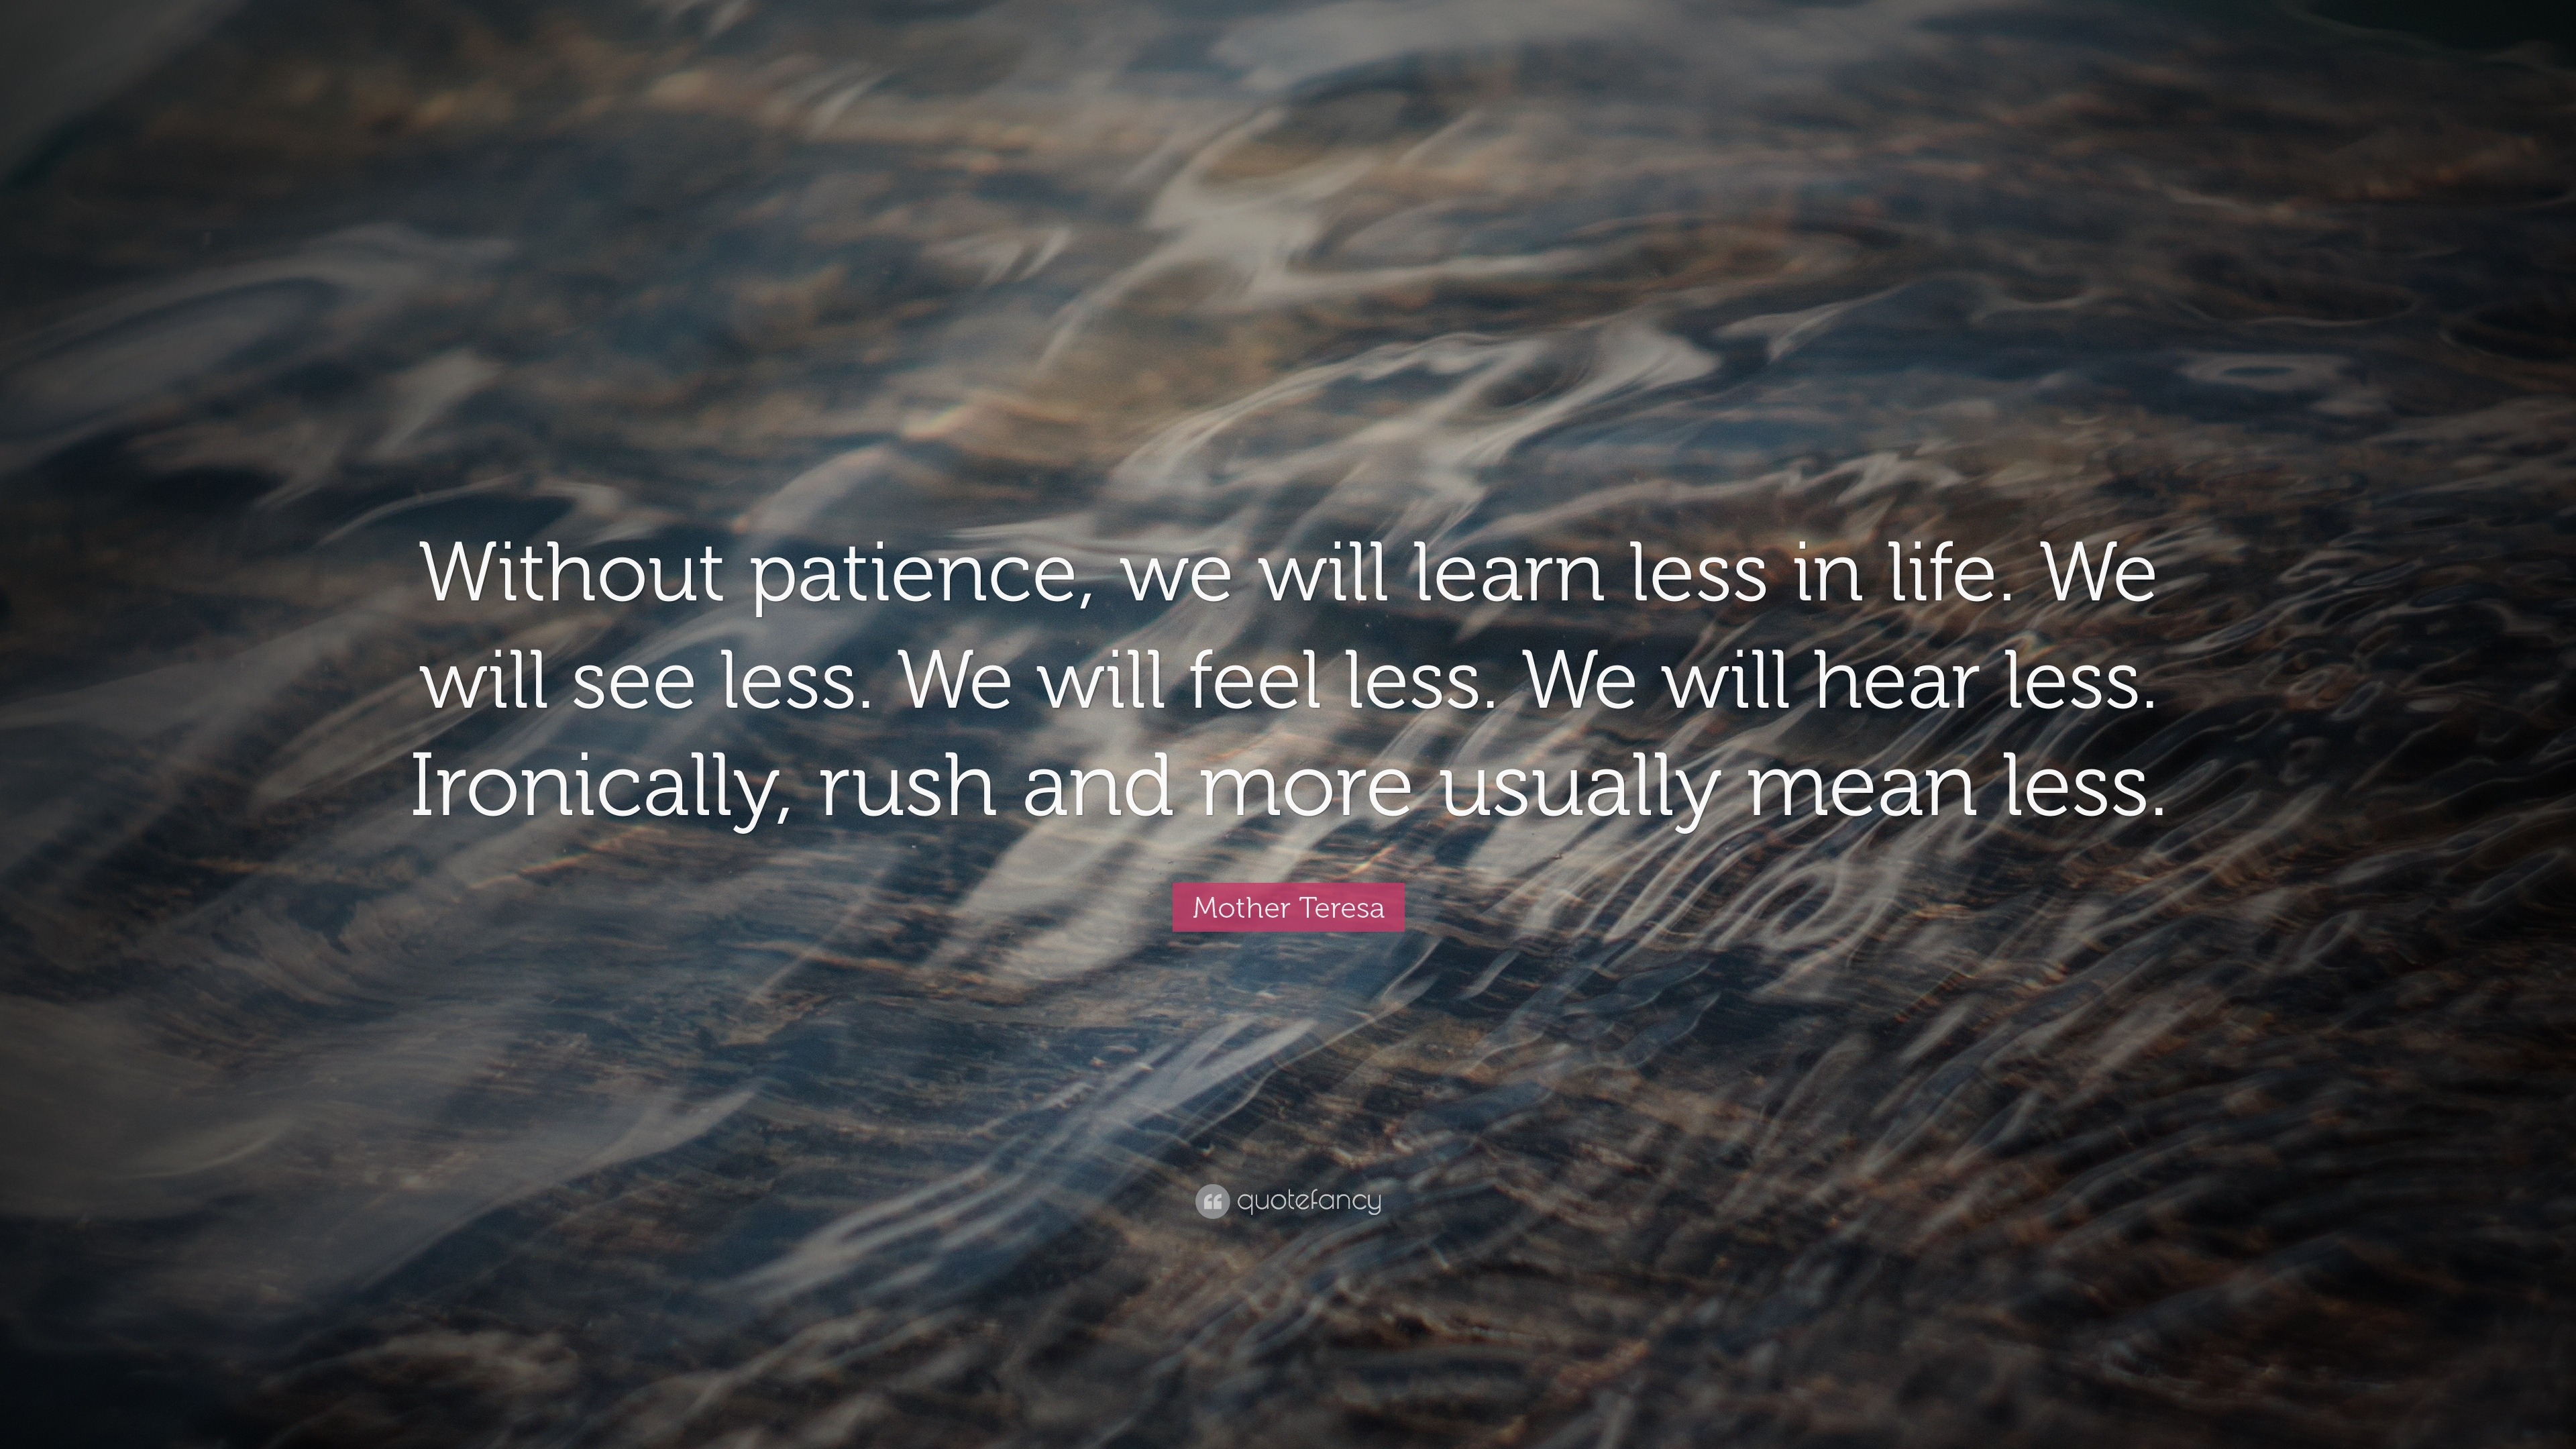 Mother Teresa Quote “Without patience we will learn less in life We